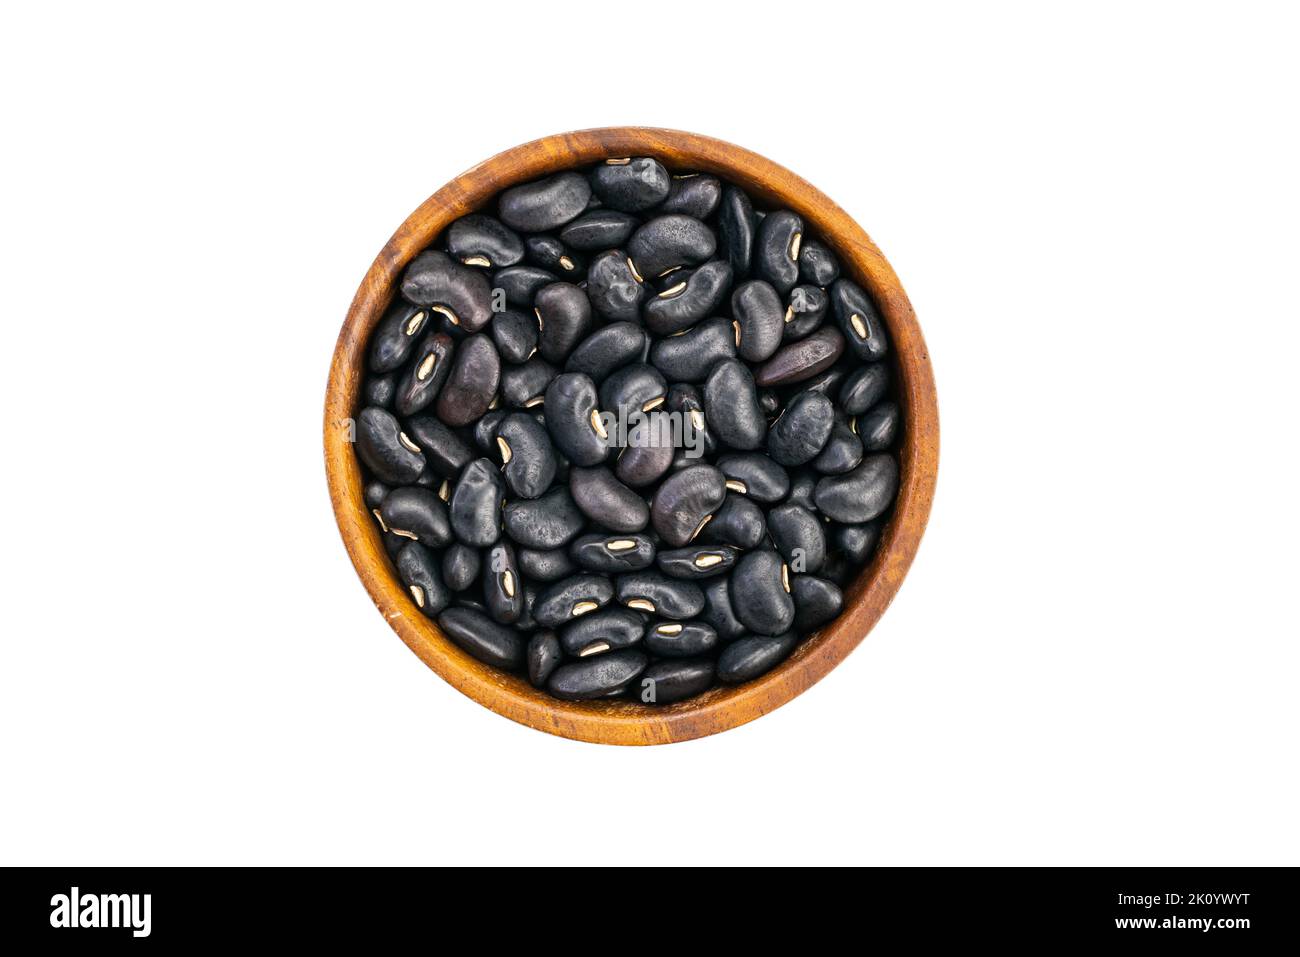 Top view or flat lay of fresh raw black bean in wooden bowl isolated on white background with clipping path. Stock Photo